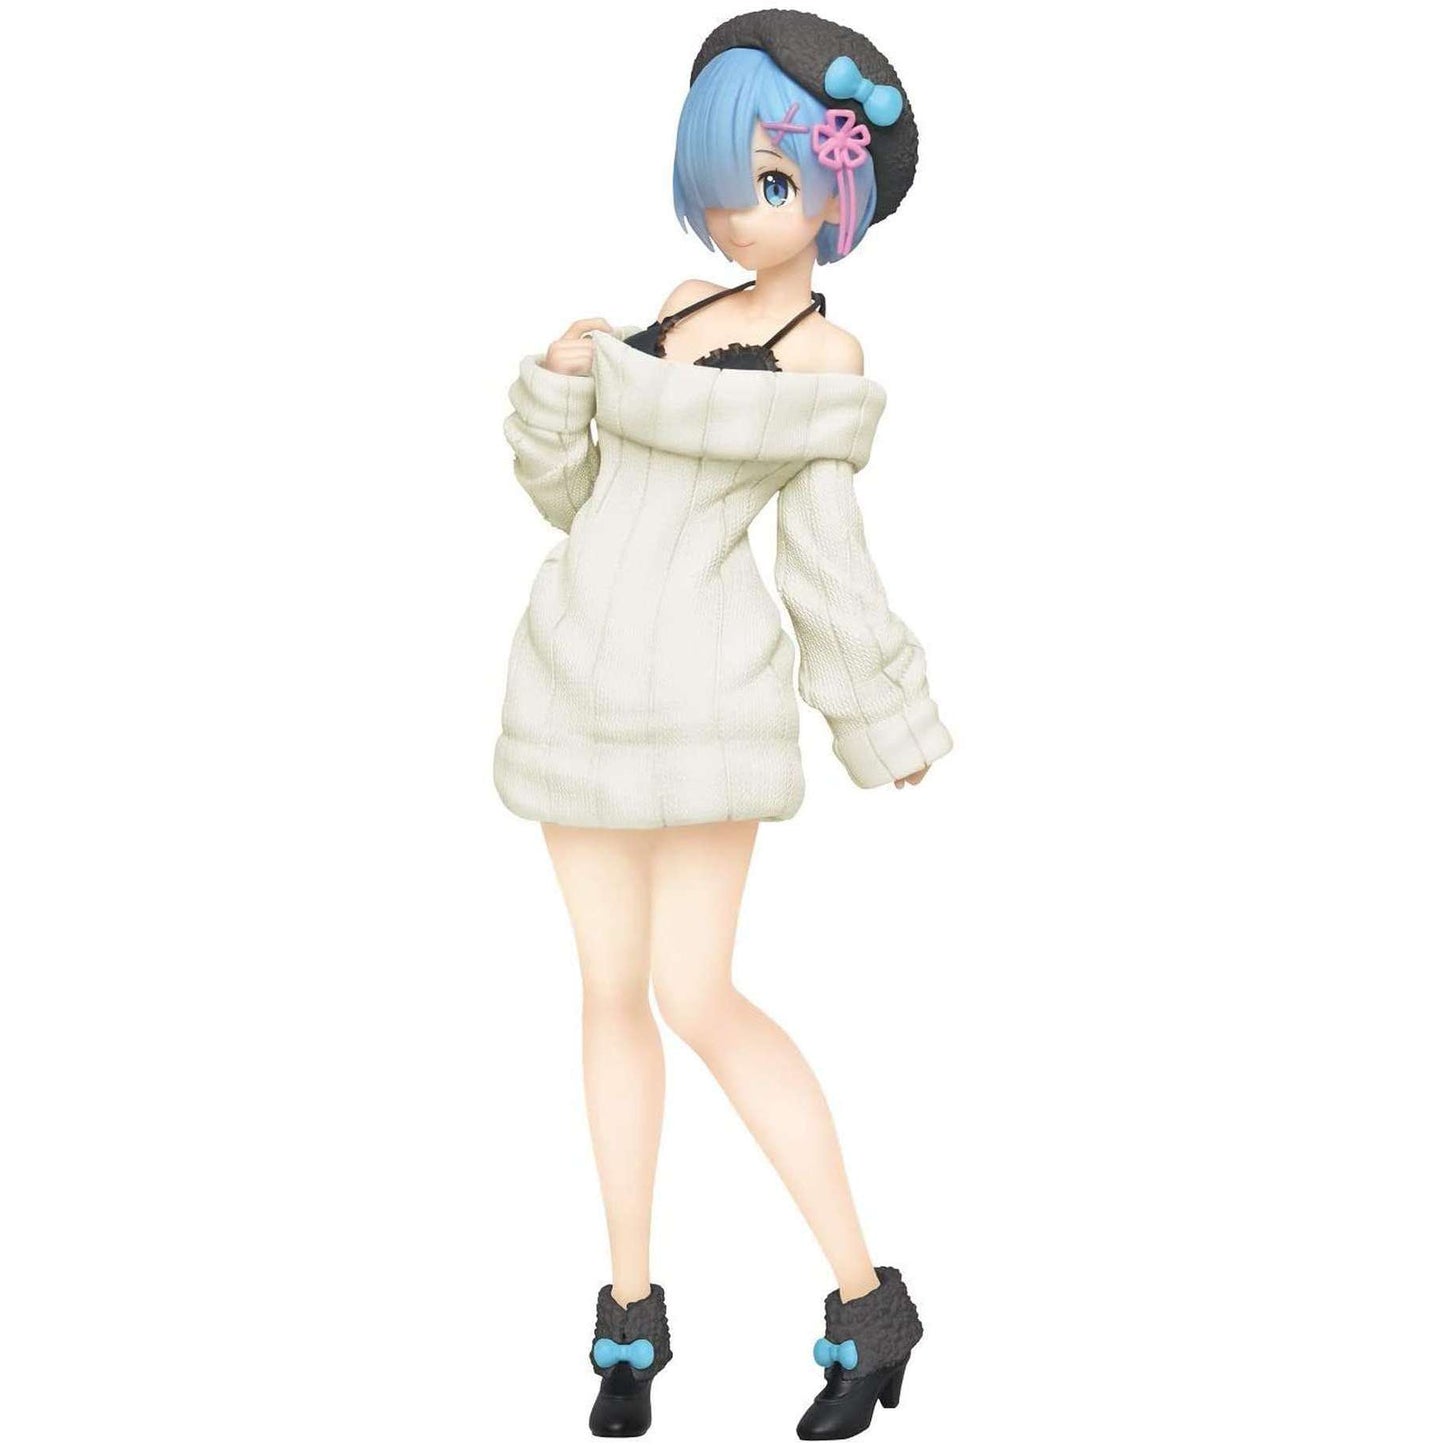 RE:Zero Starting Life Another World: REM Knit Dress Ver. Figure-Renewal, Taito